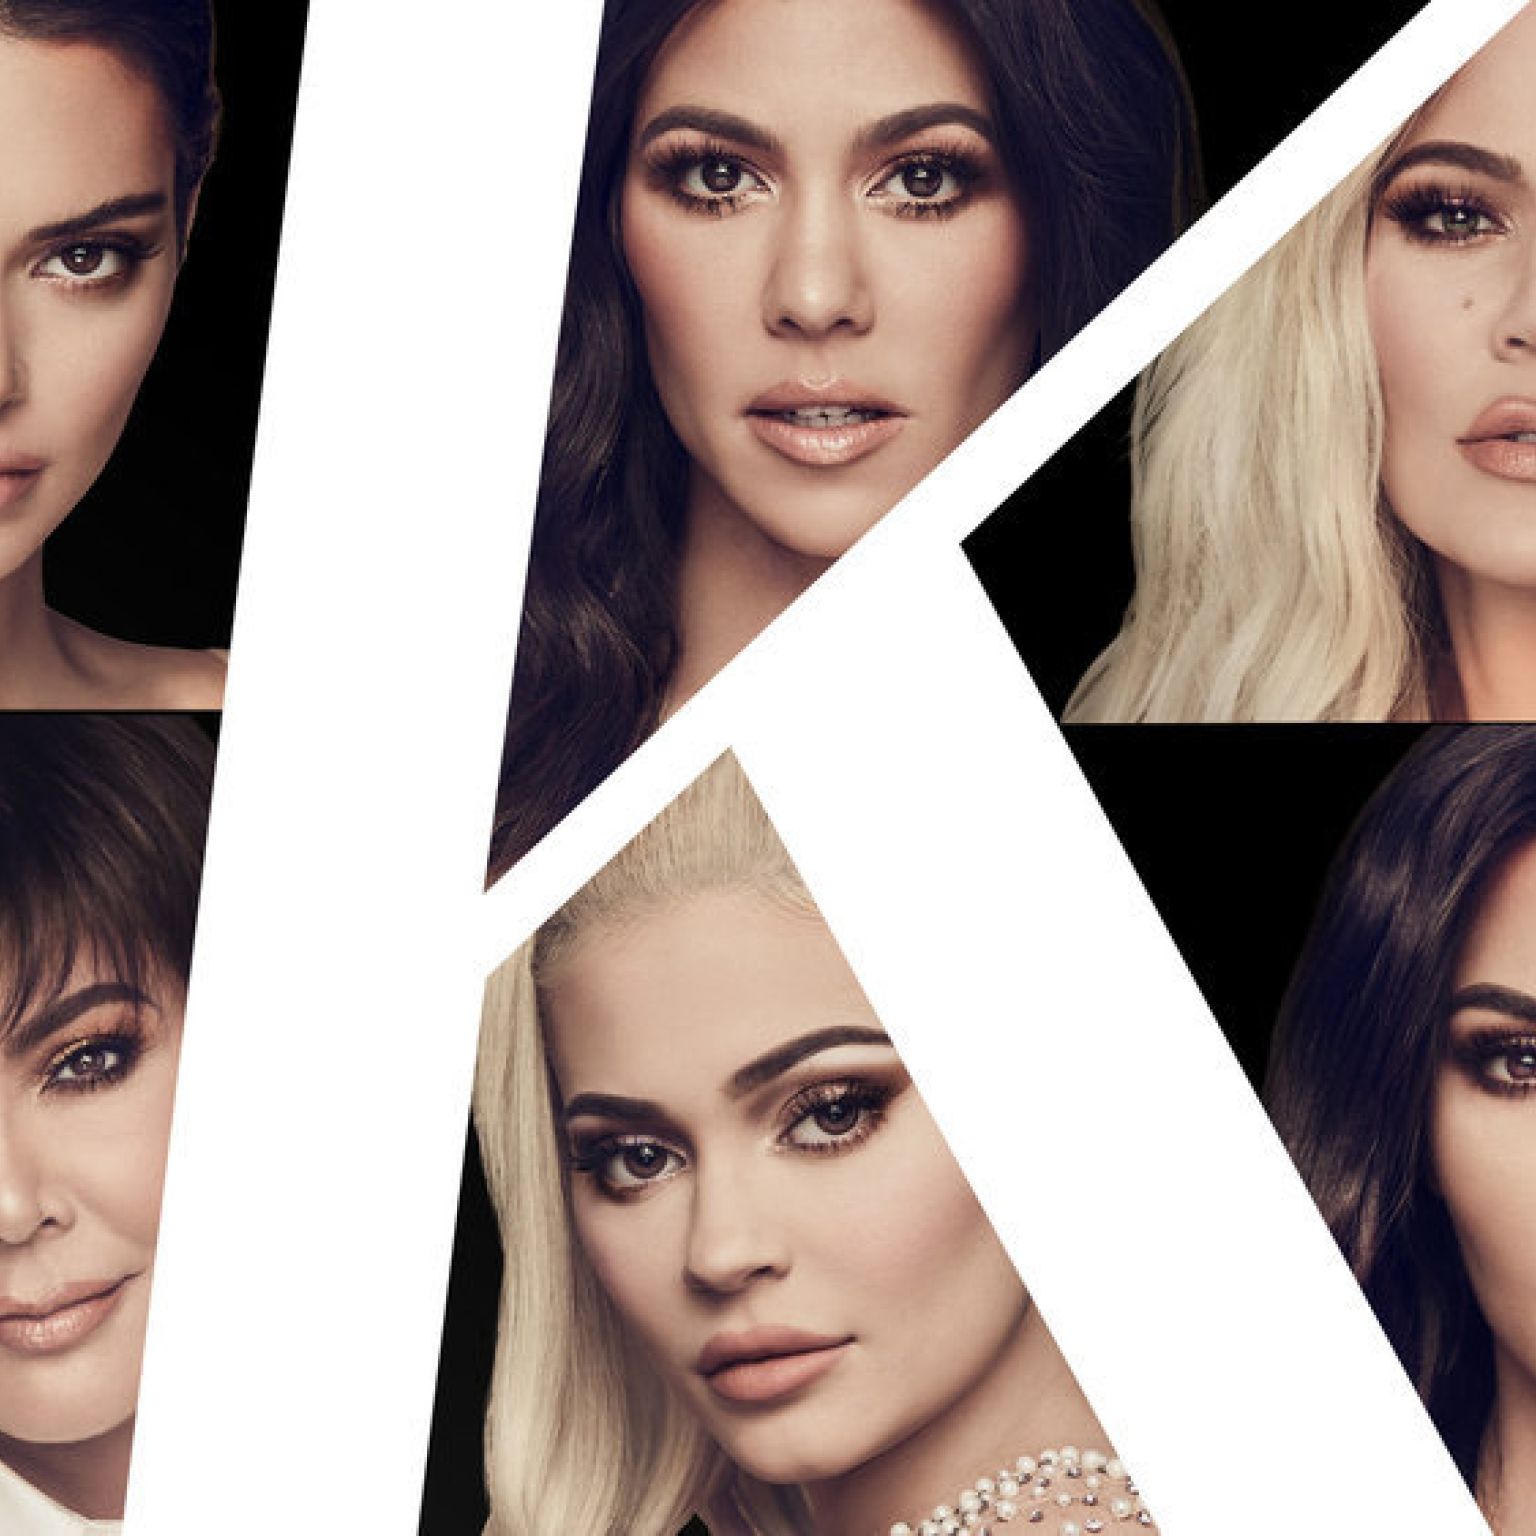 Keeping-up-with-the-Kardashians.